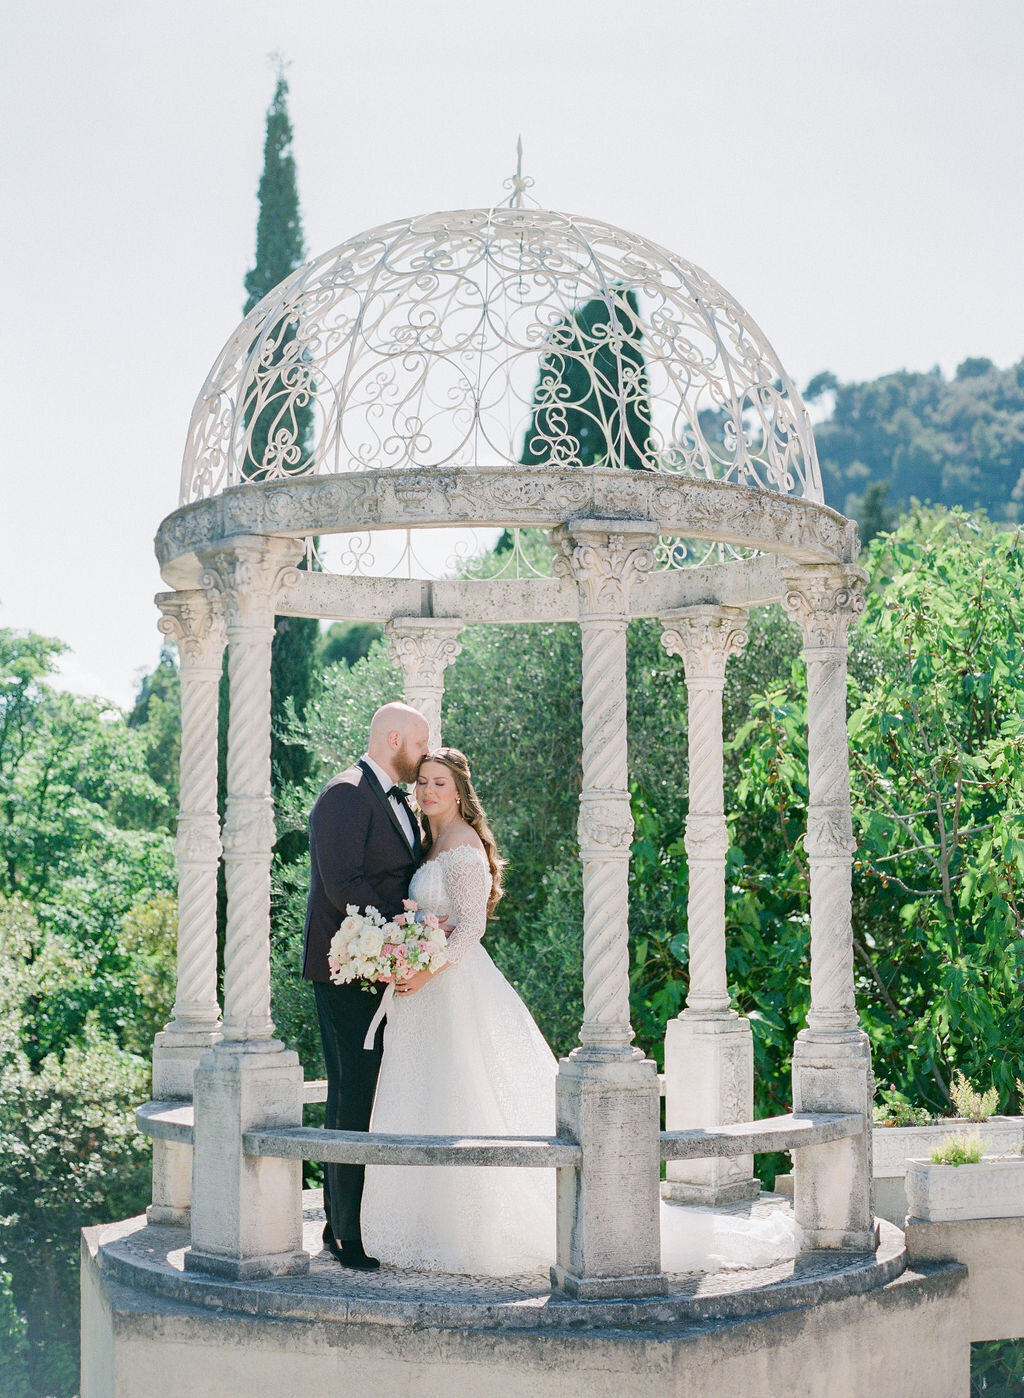 Jennifer Fox Weddings English speaking wedding planning & design agency in France crafting refined and bespoke weddings and celebrations Provence, Paris and destination Alyssa-Aaron-Wedding-Molly-Carr-Photography-Bride-Groom-17